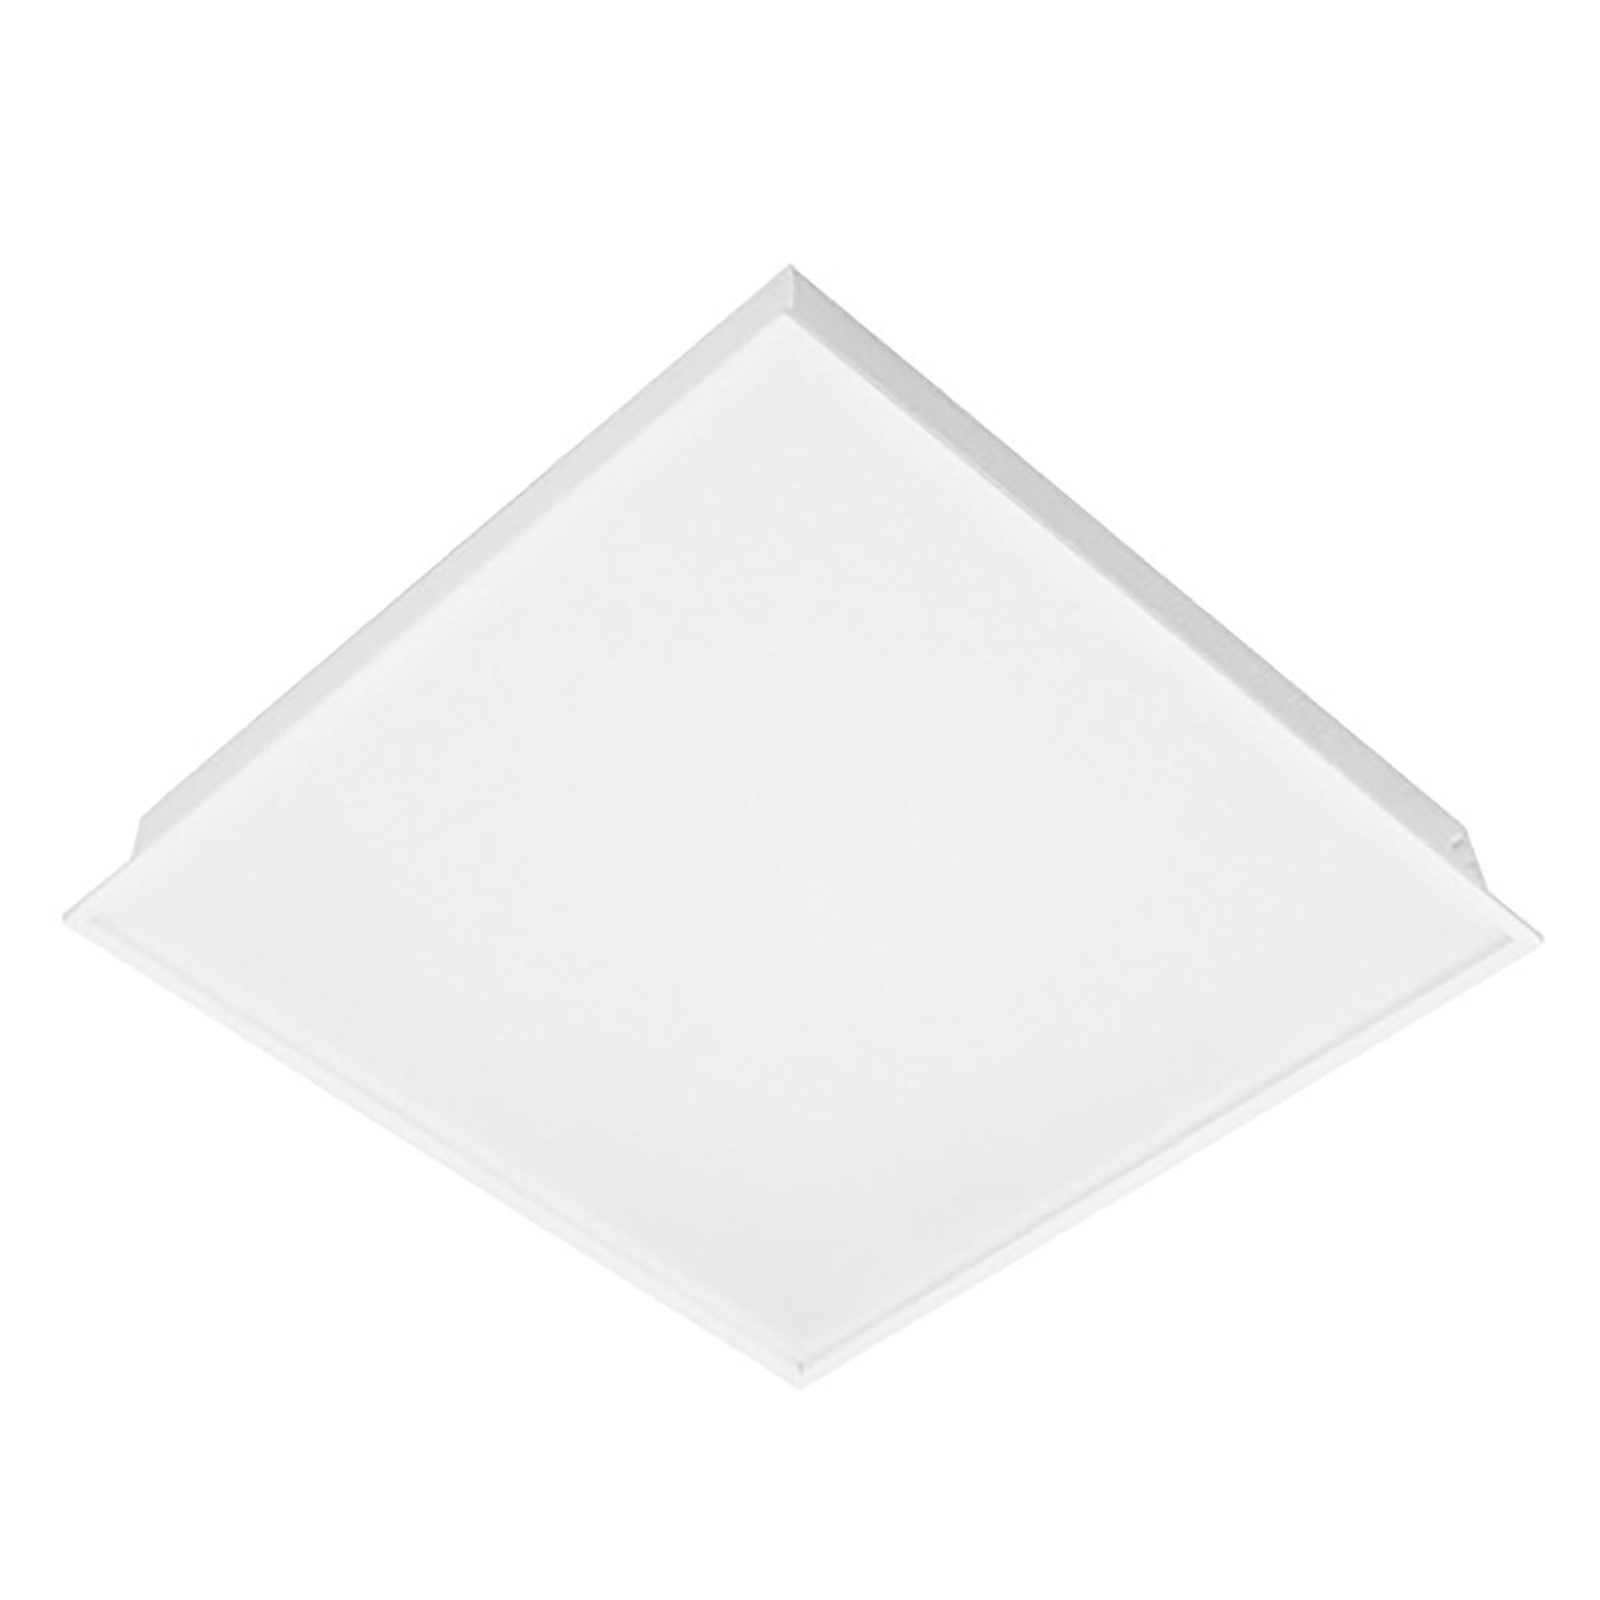 IBP LED troffer panel PMMA Cover, 32 W, 4,000K